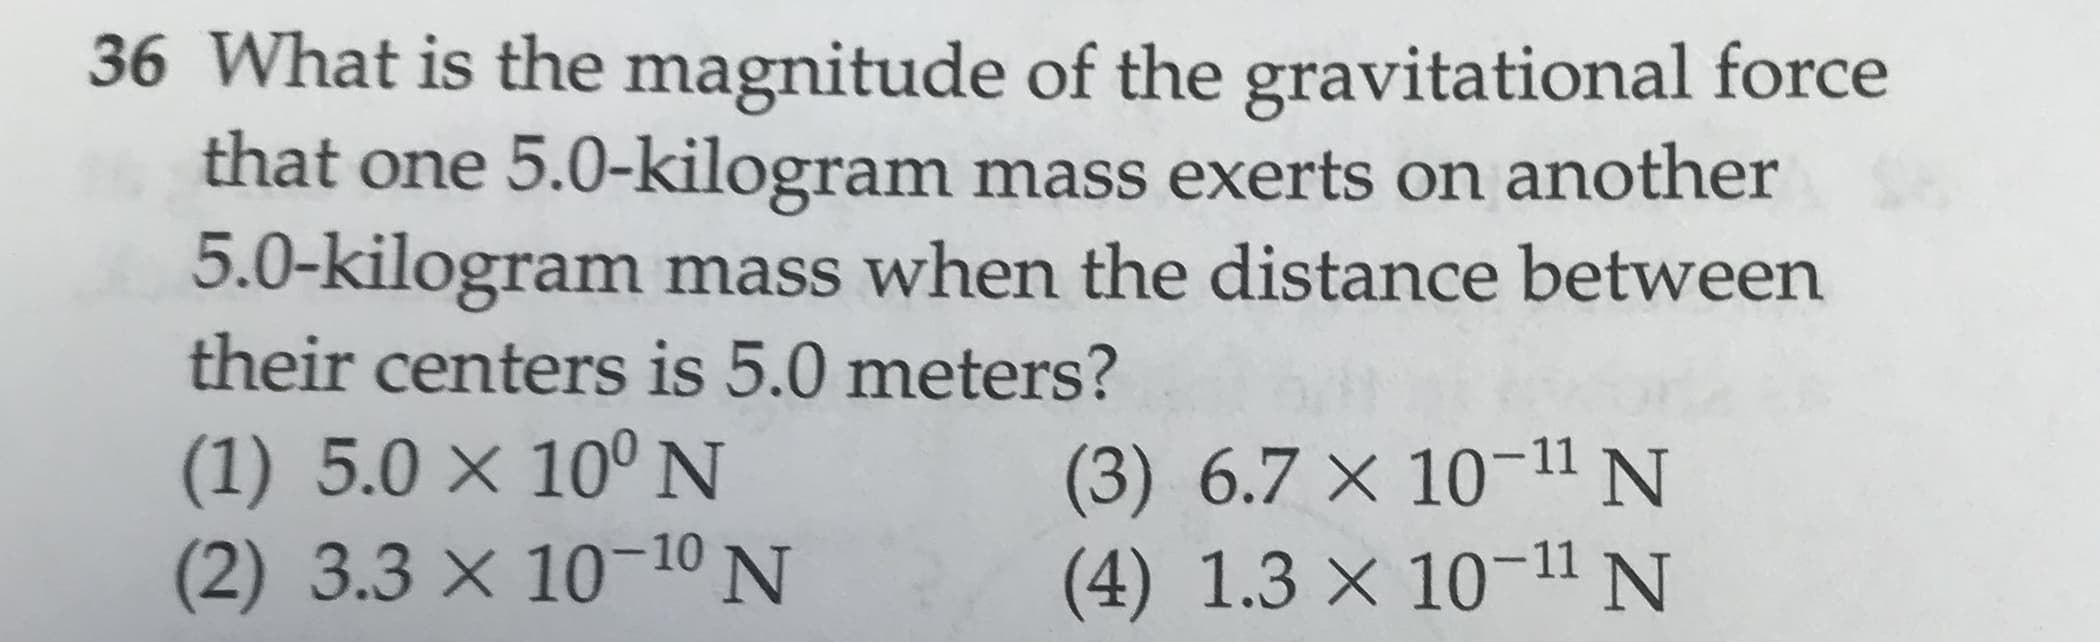 36 What is the magnitude of the gravitational force
that one 5.0-kilogram mass exerts on another
5.0-kilogram mass when the distance between
their centers is 5.0 meters?
(1) 5.0 x 100 N
(2) 3.3 x 1010 N
(3) 6.7 X 10-11 N
(4) 1.3 x 1011 N
